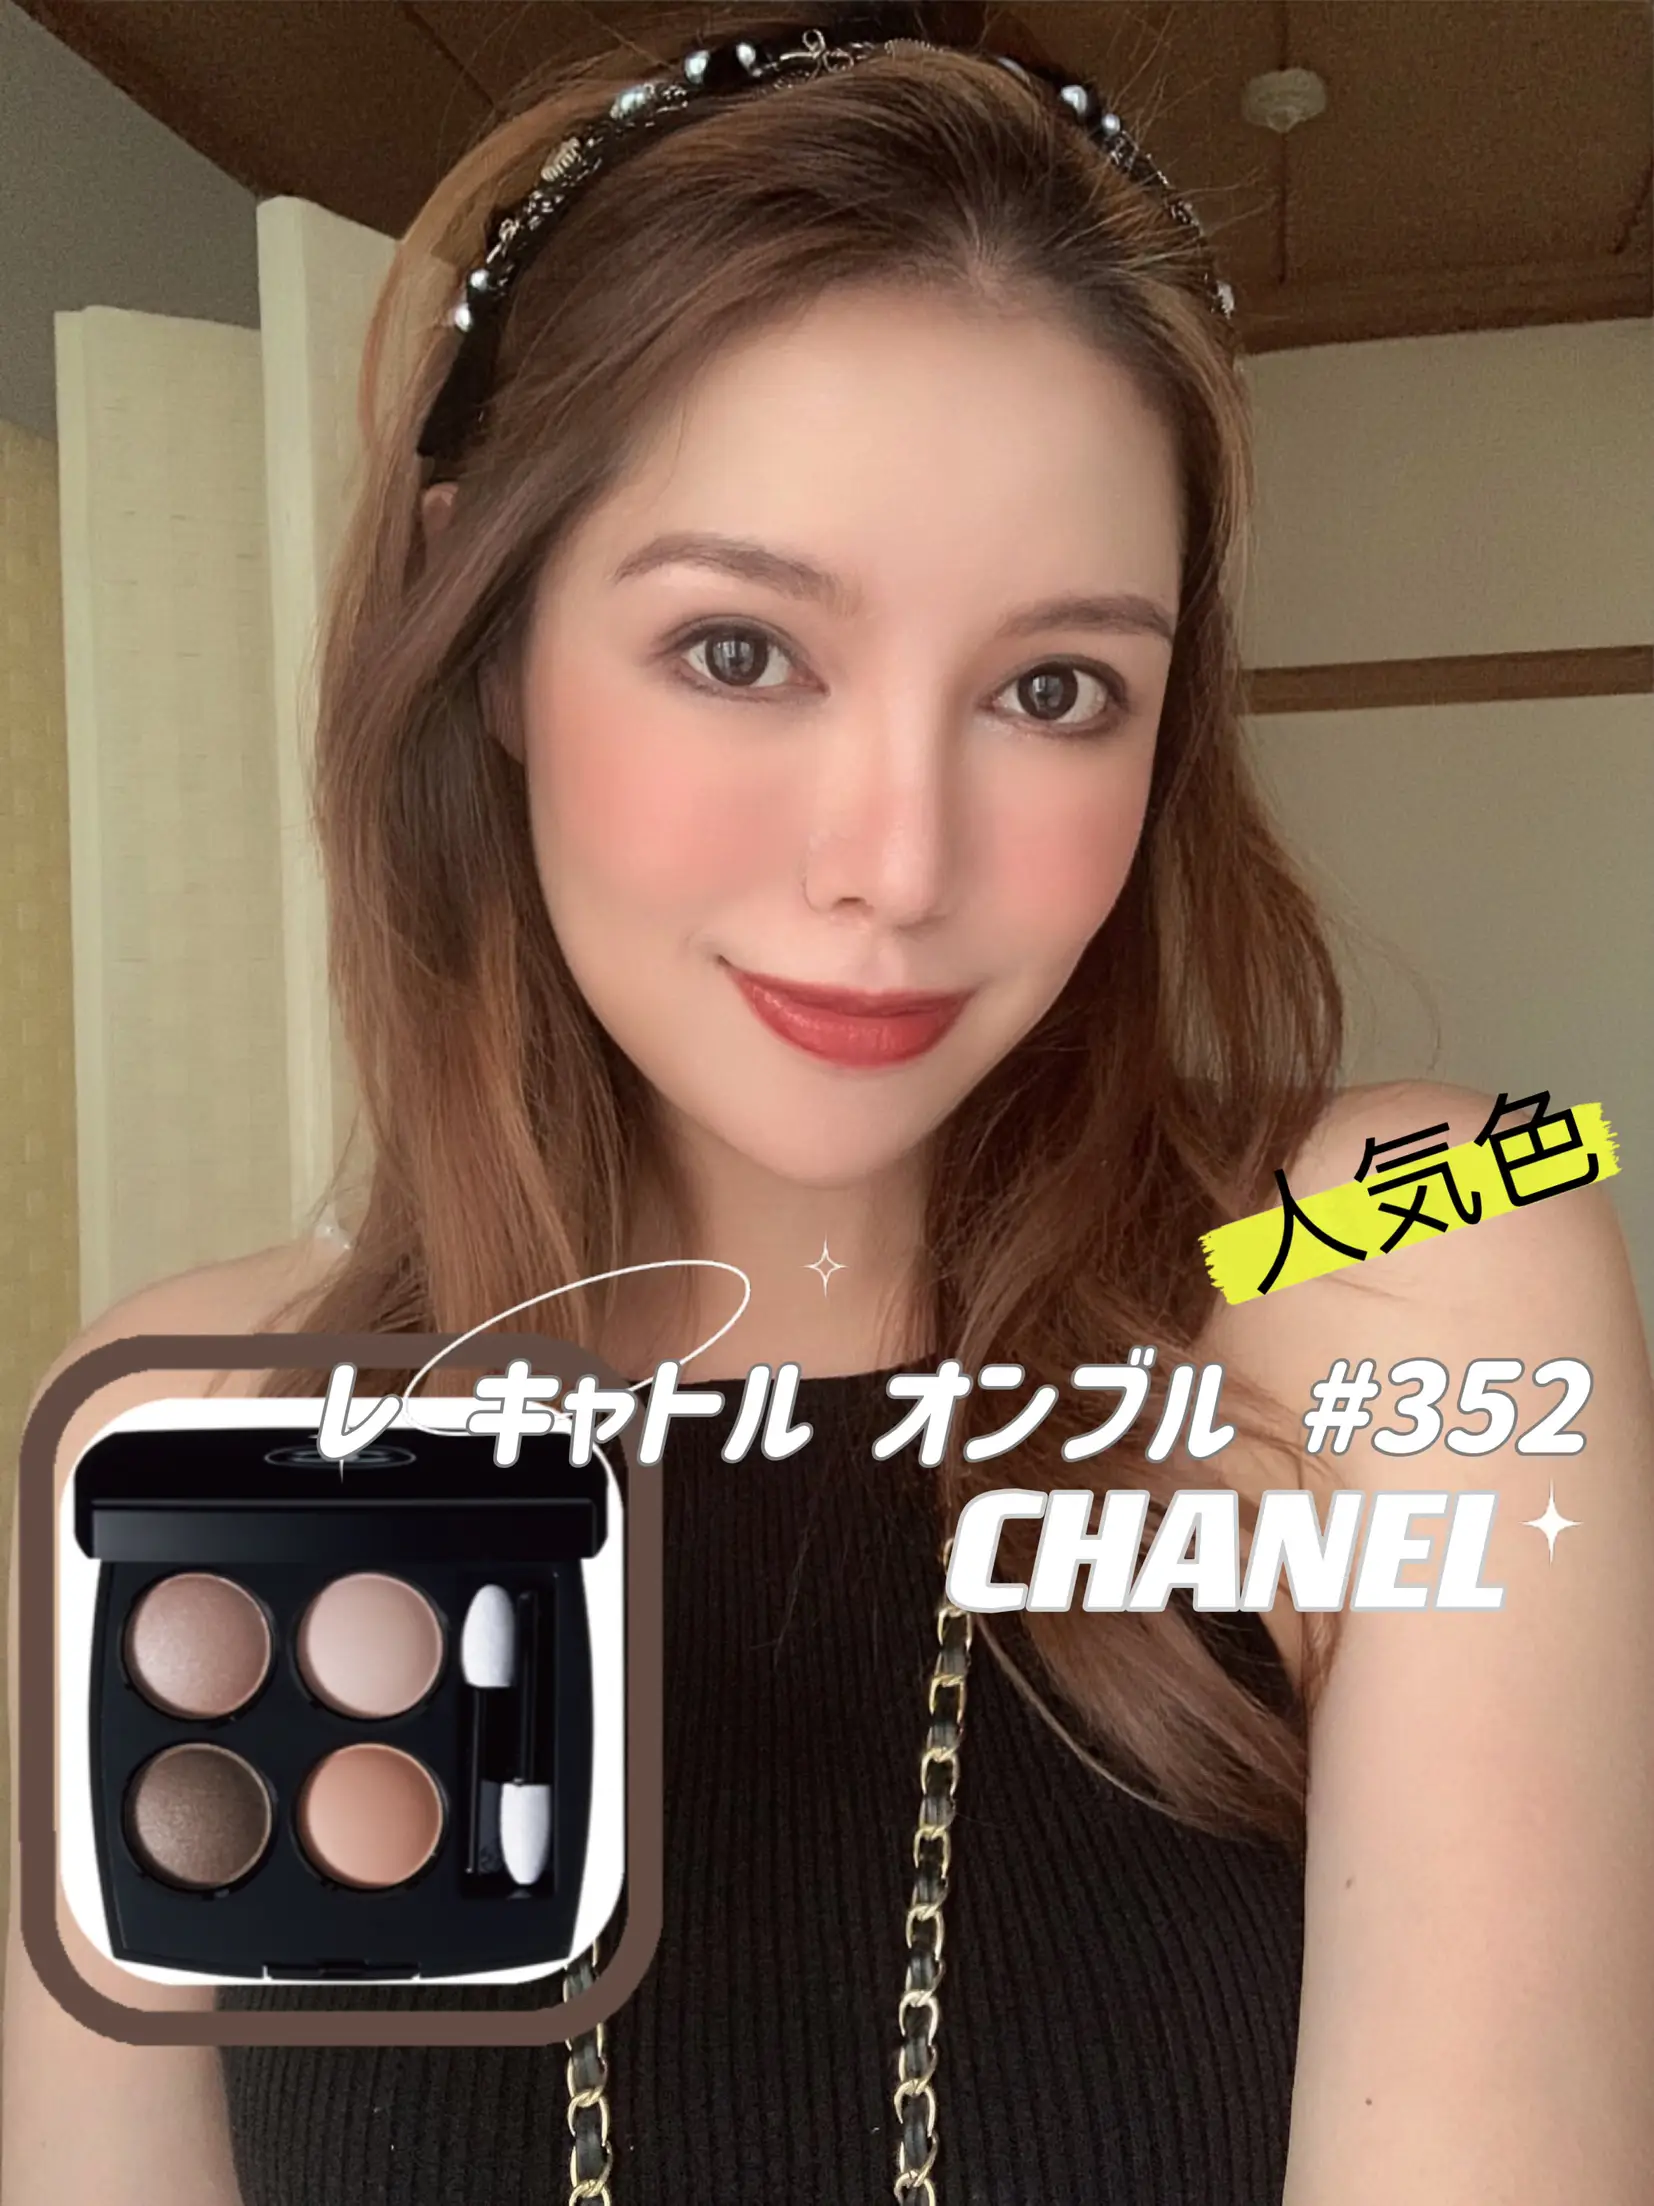 CHANEL 352 Elemental with pure greed style makeup